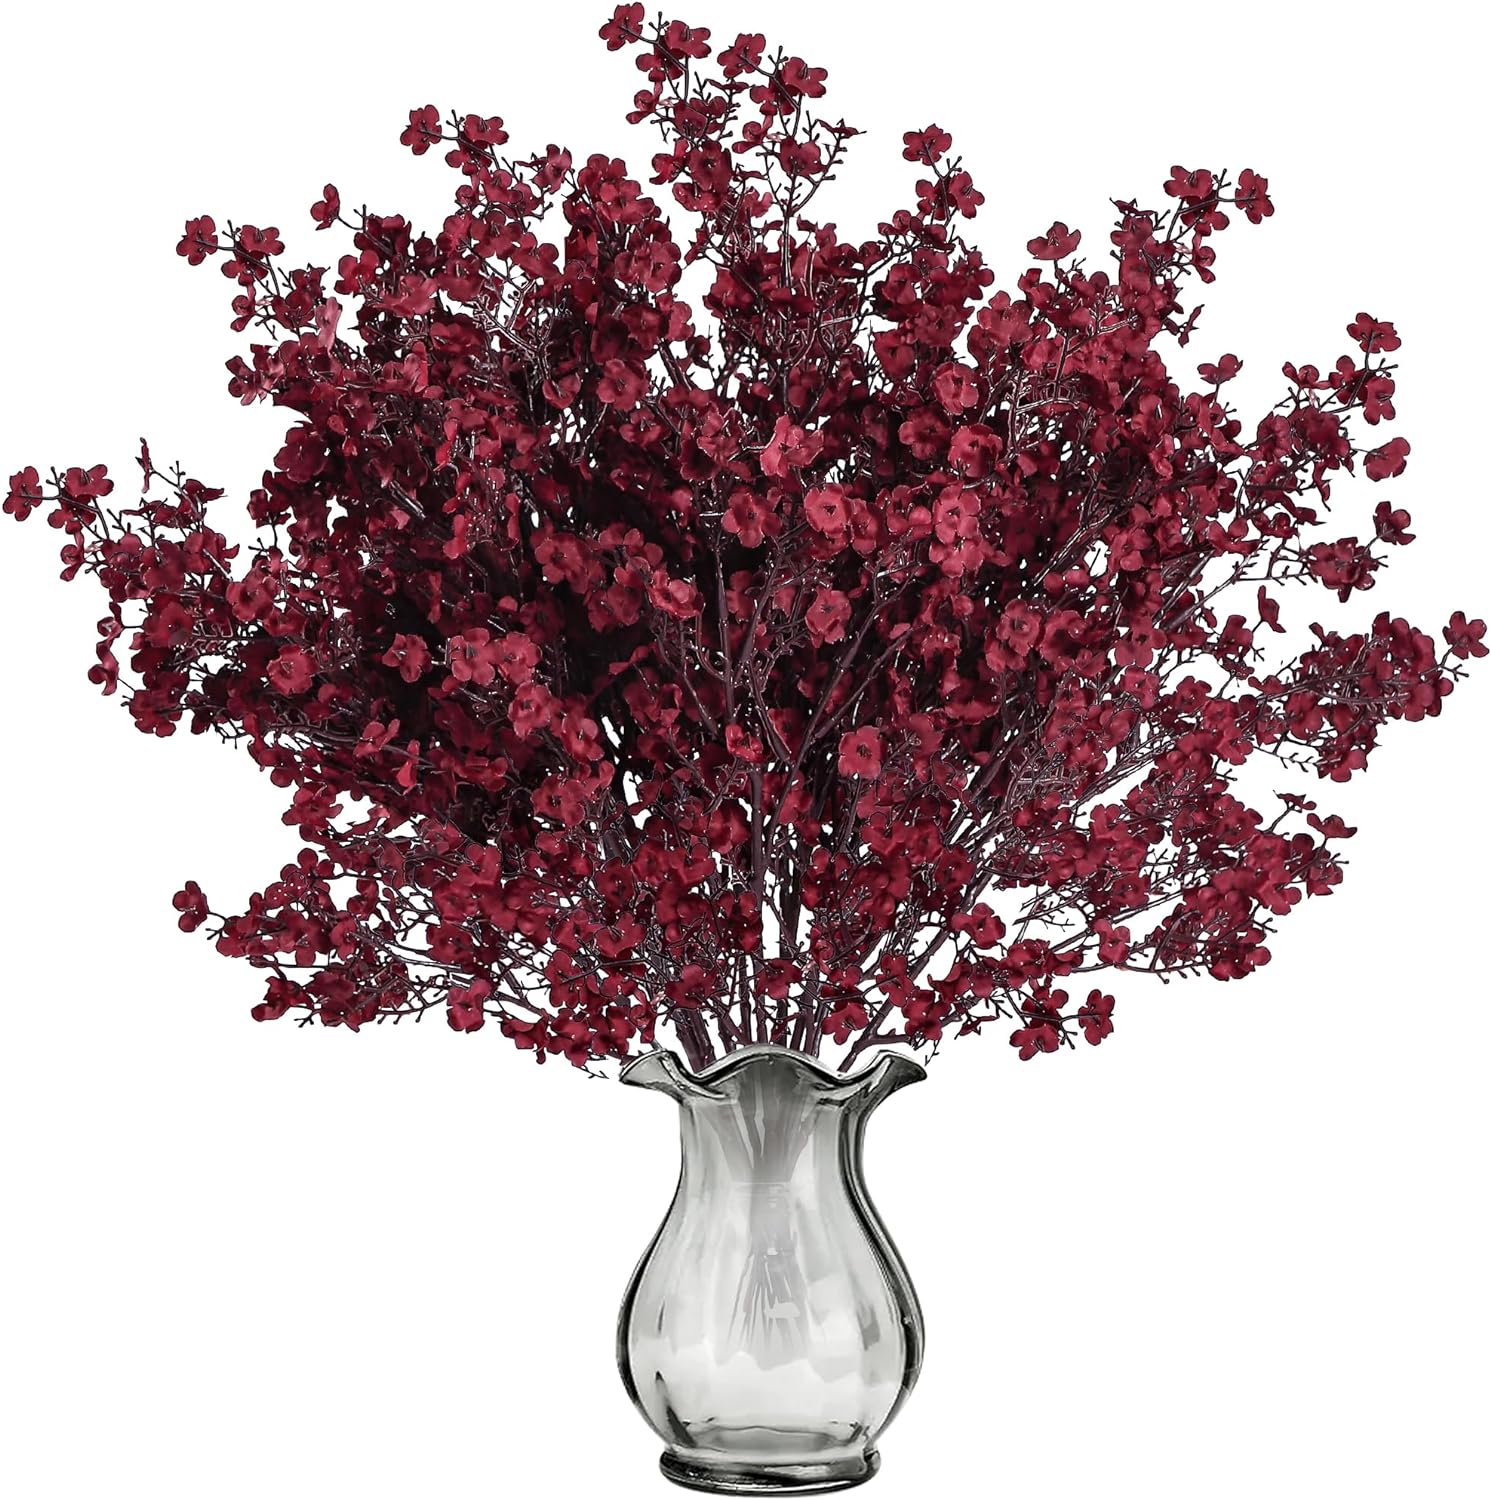 Sggvecsy 15 Pcs Babys Breath Artificial Flowers Gypsophila Bouquets Bulk Real Touch Fake Silk Flowers for Home DIY Floral Arrangement Table Centerpiece Fall Thanksgiving Autumn Decoration (Burgundy)